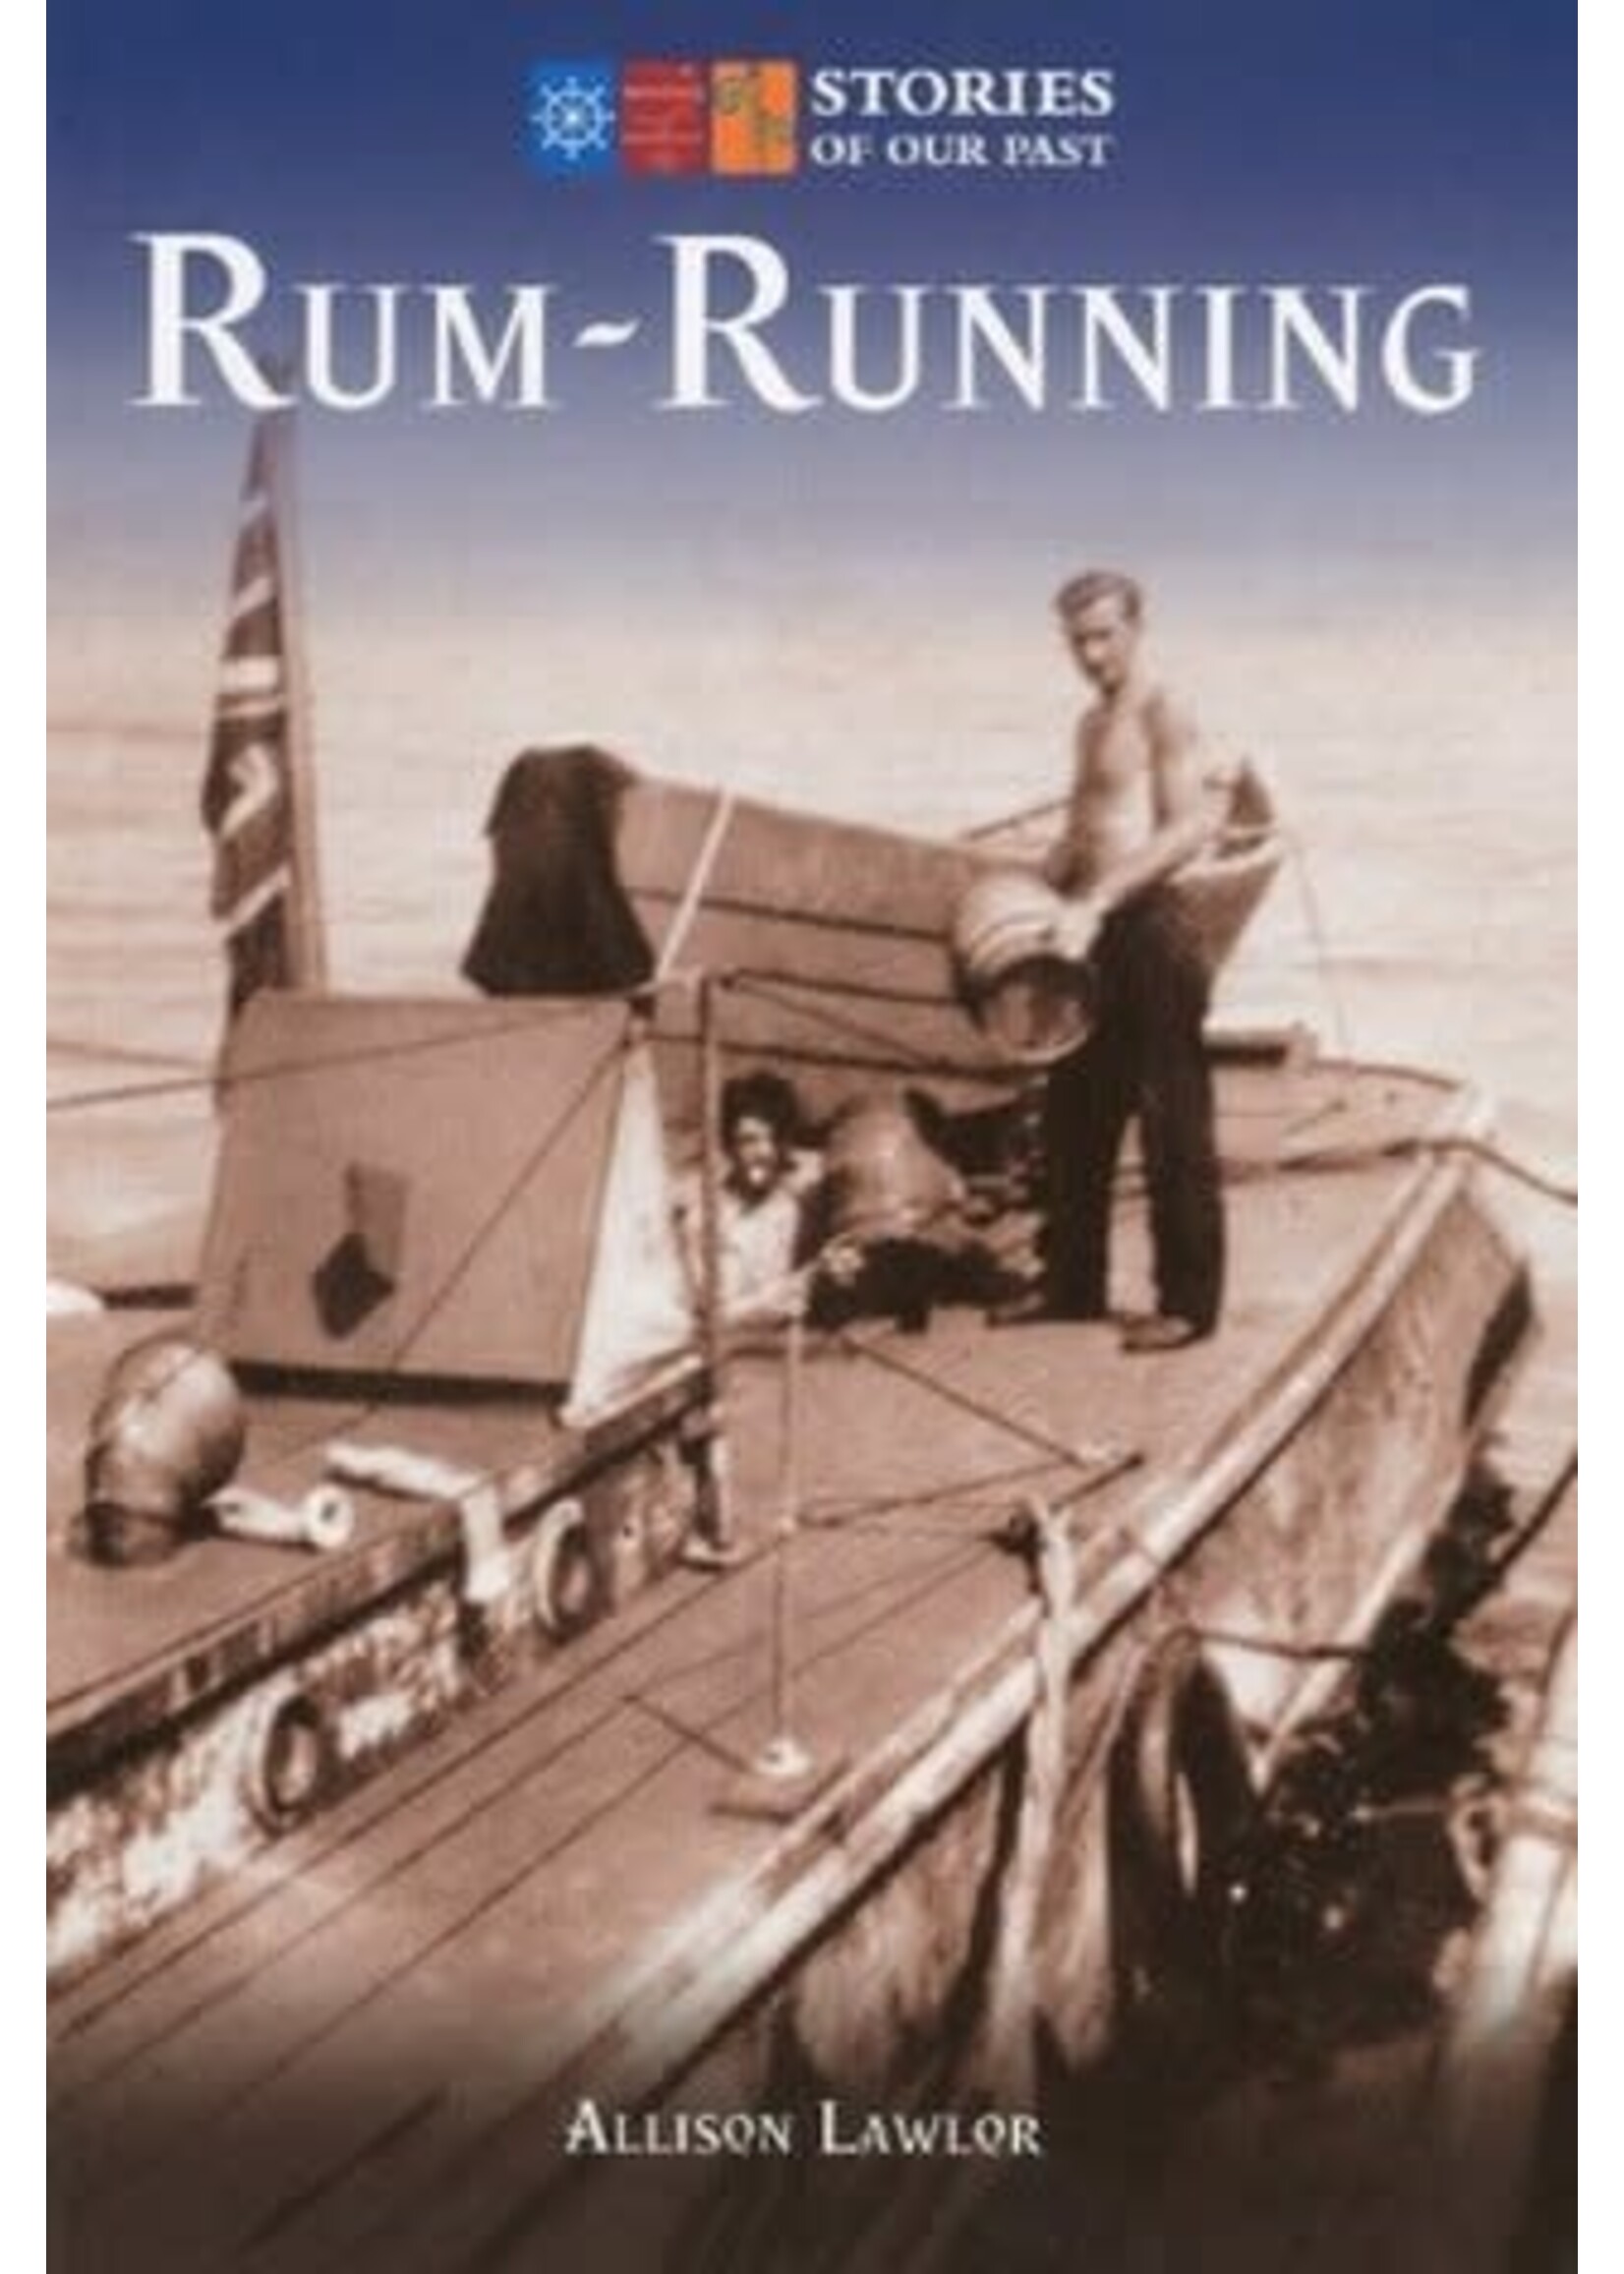 Rum-Running (Stories of Our Past) by Allison Lawlor